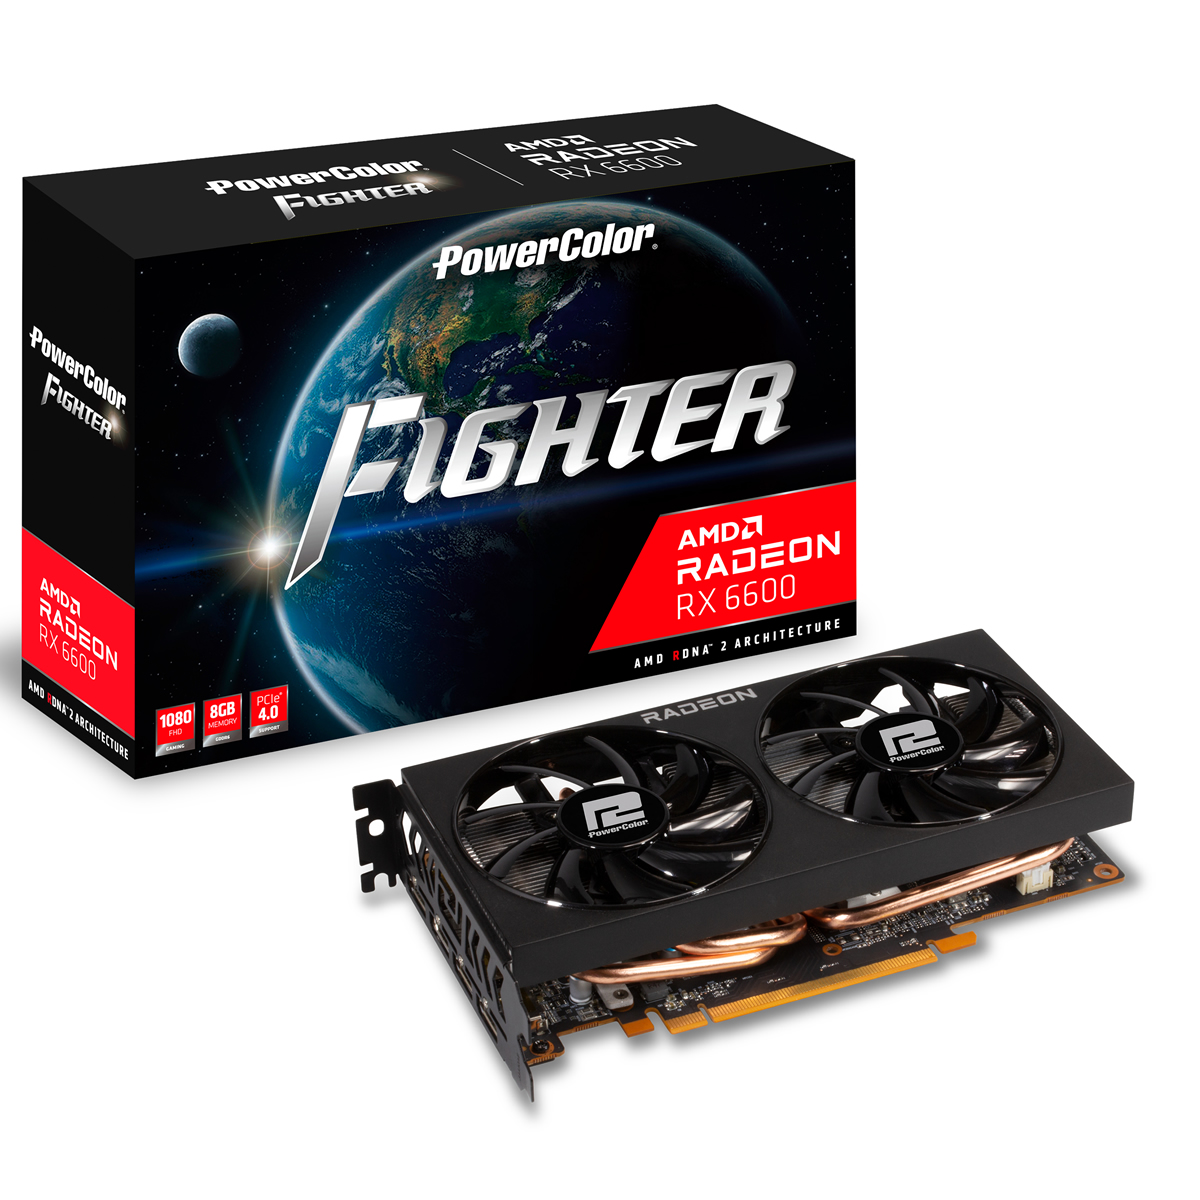 PowerColor - PowerColor Radeon RX 6600 Fighter 8GB GDDR6 PCI-Express Graphics Card